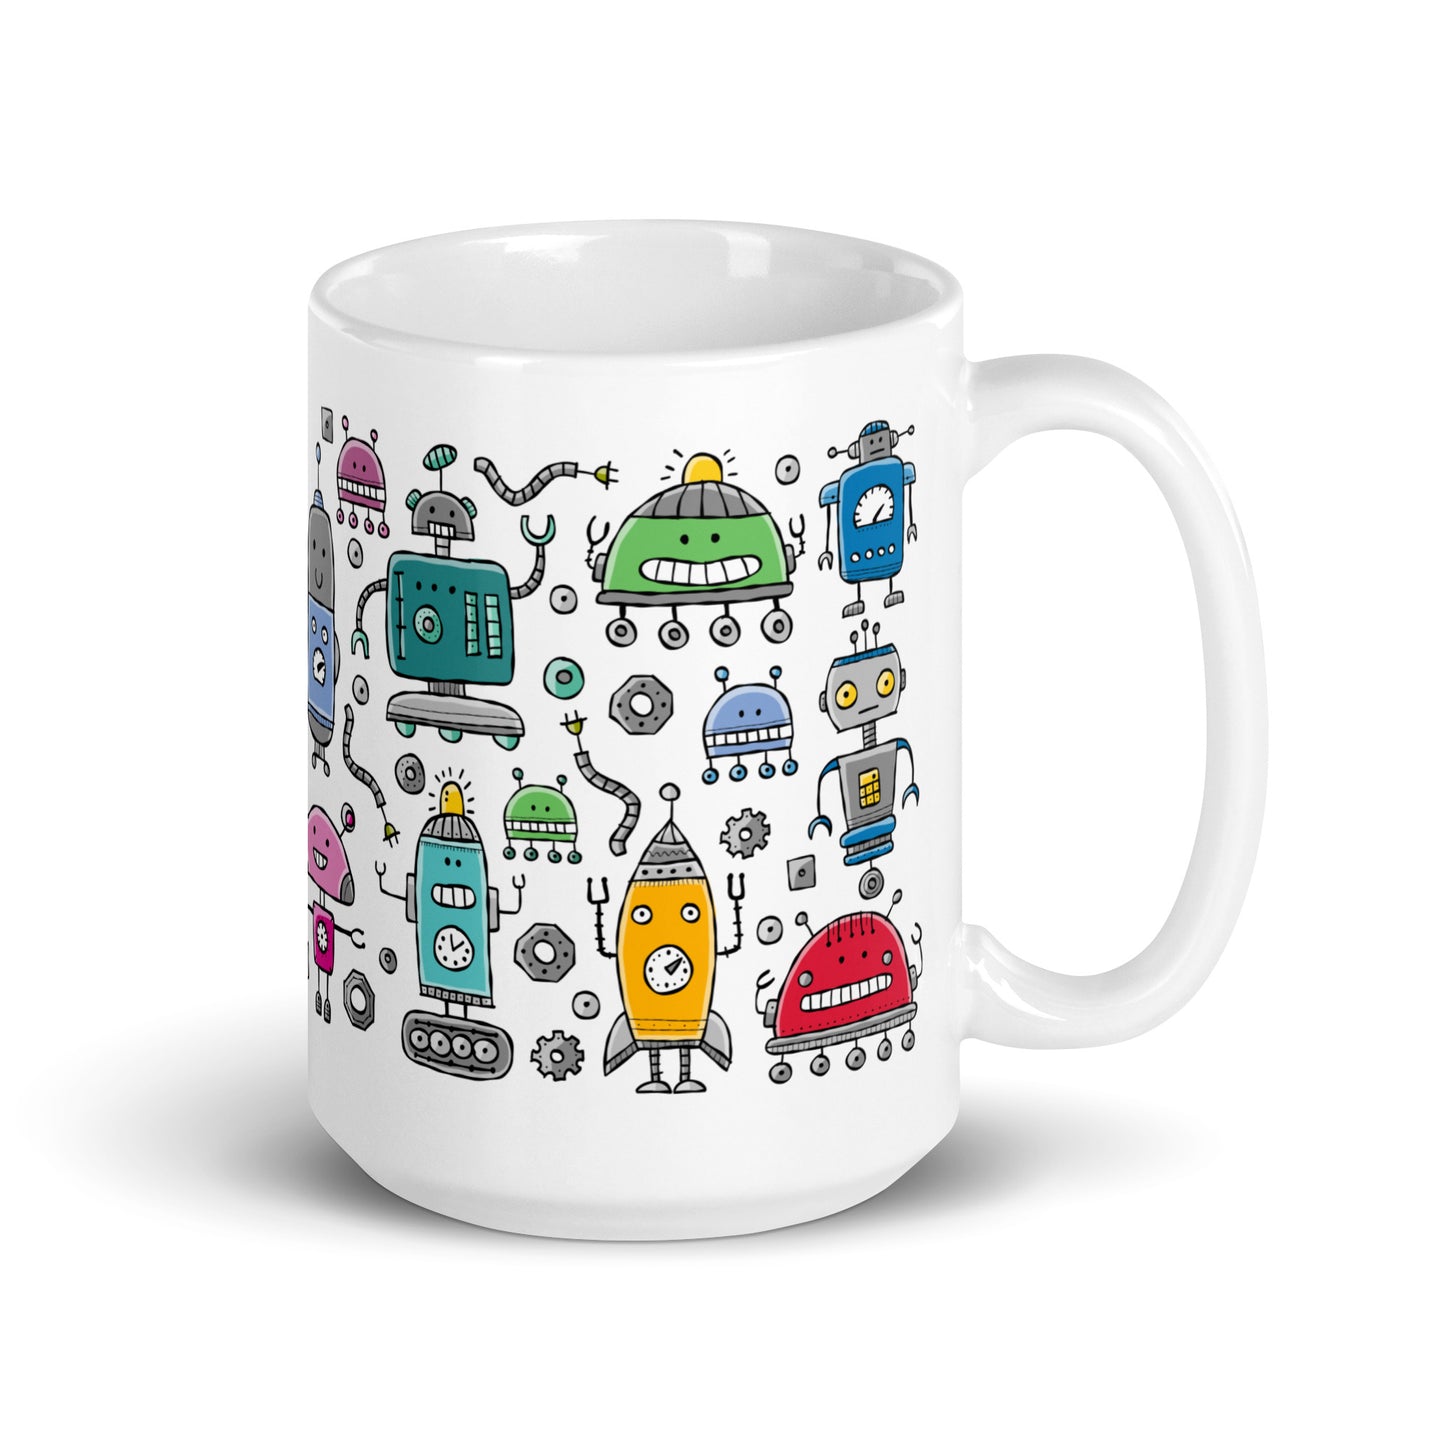 A white ceramic 15oz mug with a collection of colorful and comical robots, perfect for adding joy and laughter to your morning routine